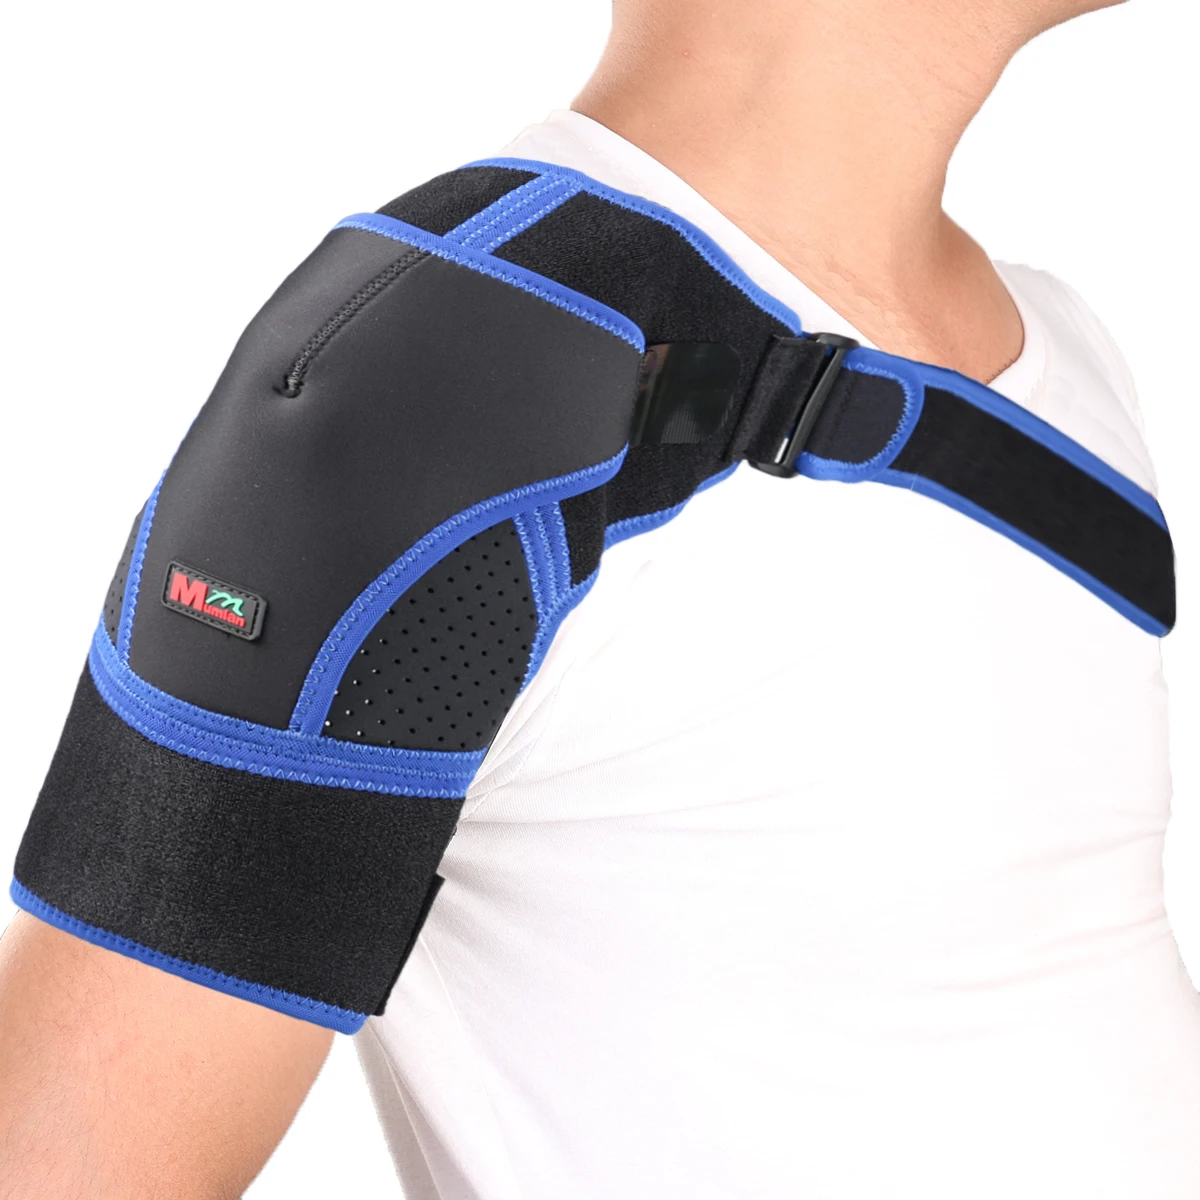 Adjustable Shoulder Brace for Right and Left,Neoprene Rotator Cuff Support Compatible Dislocated AC Joint,Sprain Strap Guard